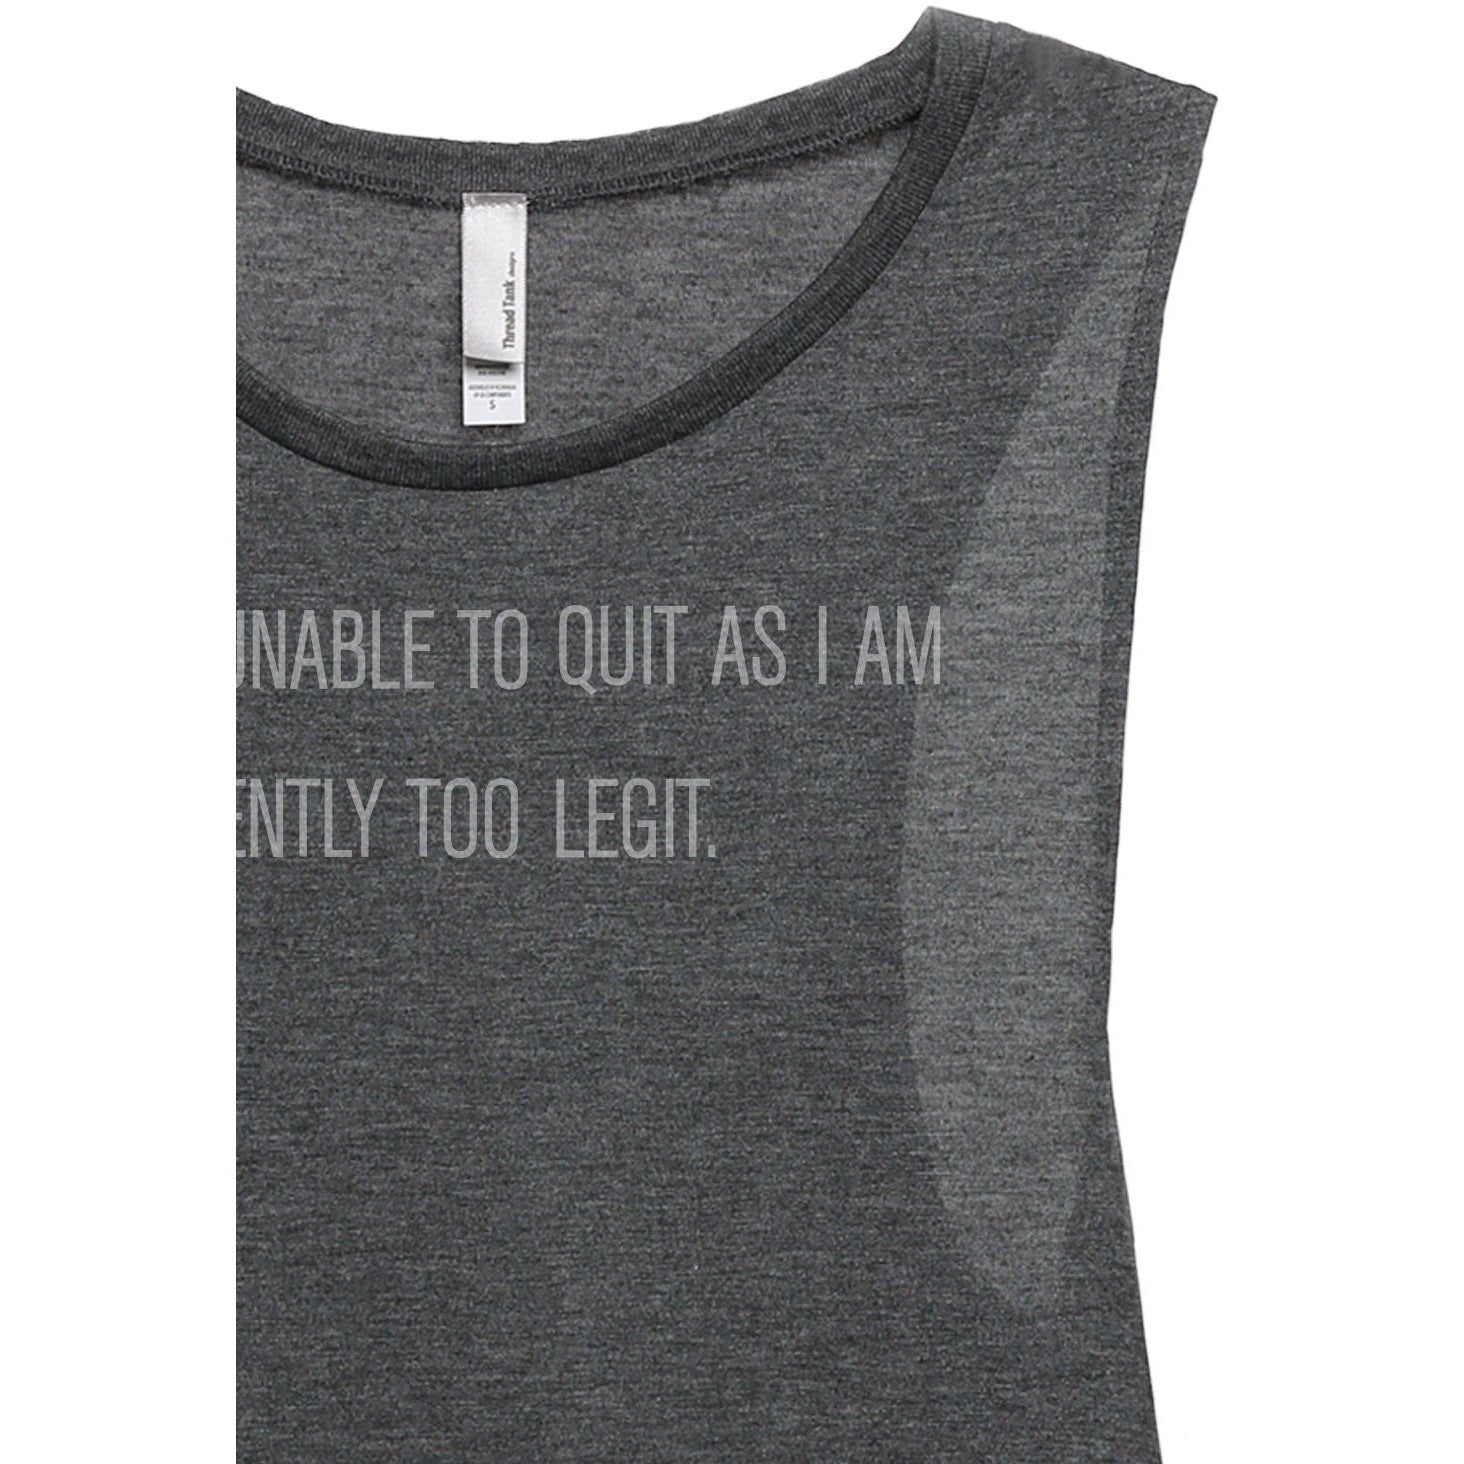 Too Legit To Quit1360W Women's Relaxed Muscle Tank Tee Charcoal Closeup Details
